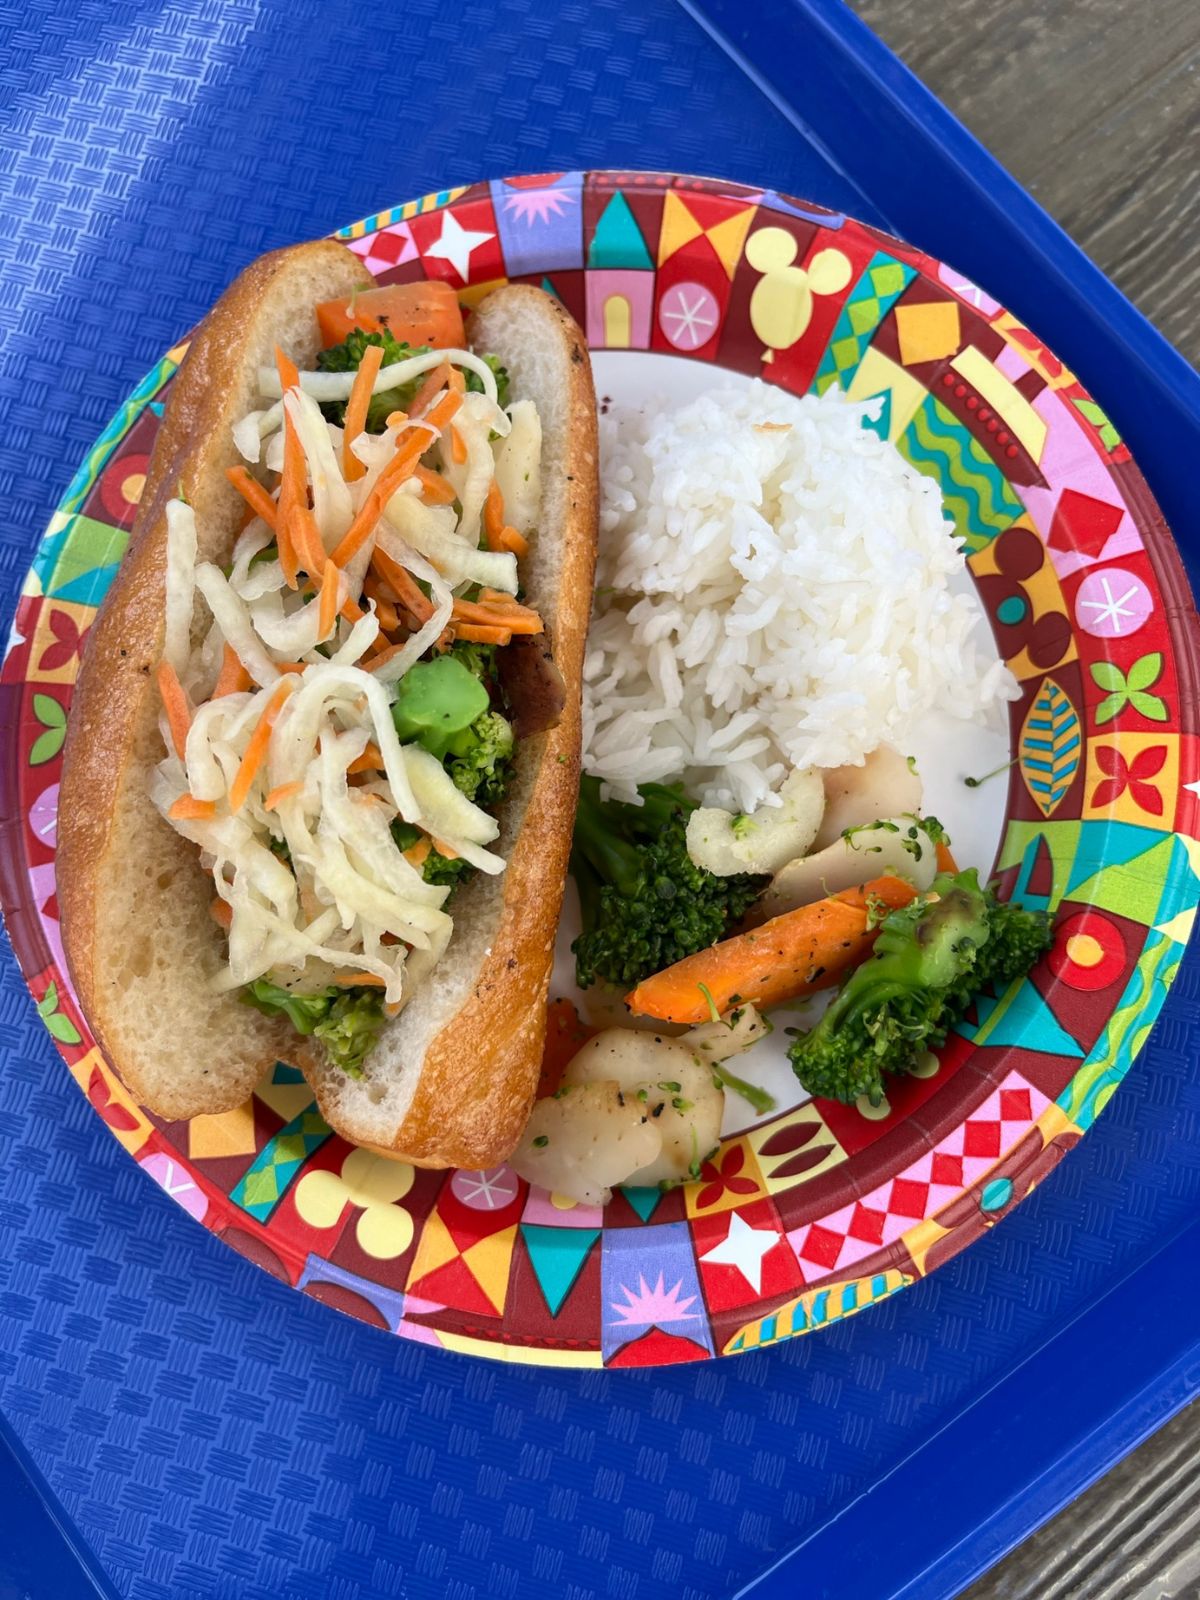 Kids Impossible Bánh Mì at lucky fortune cookery